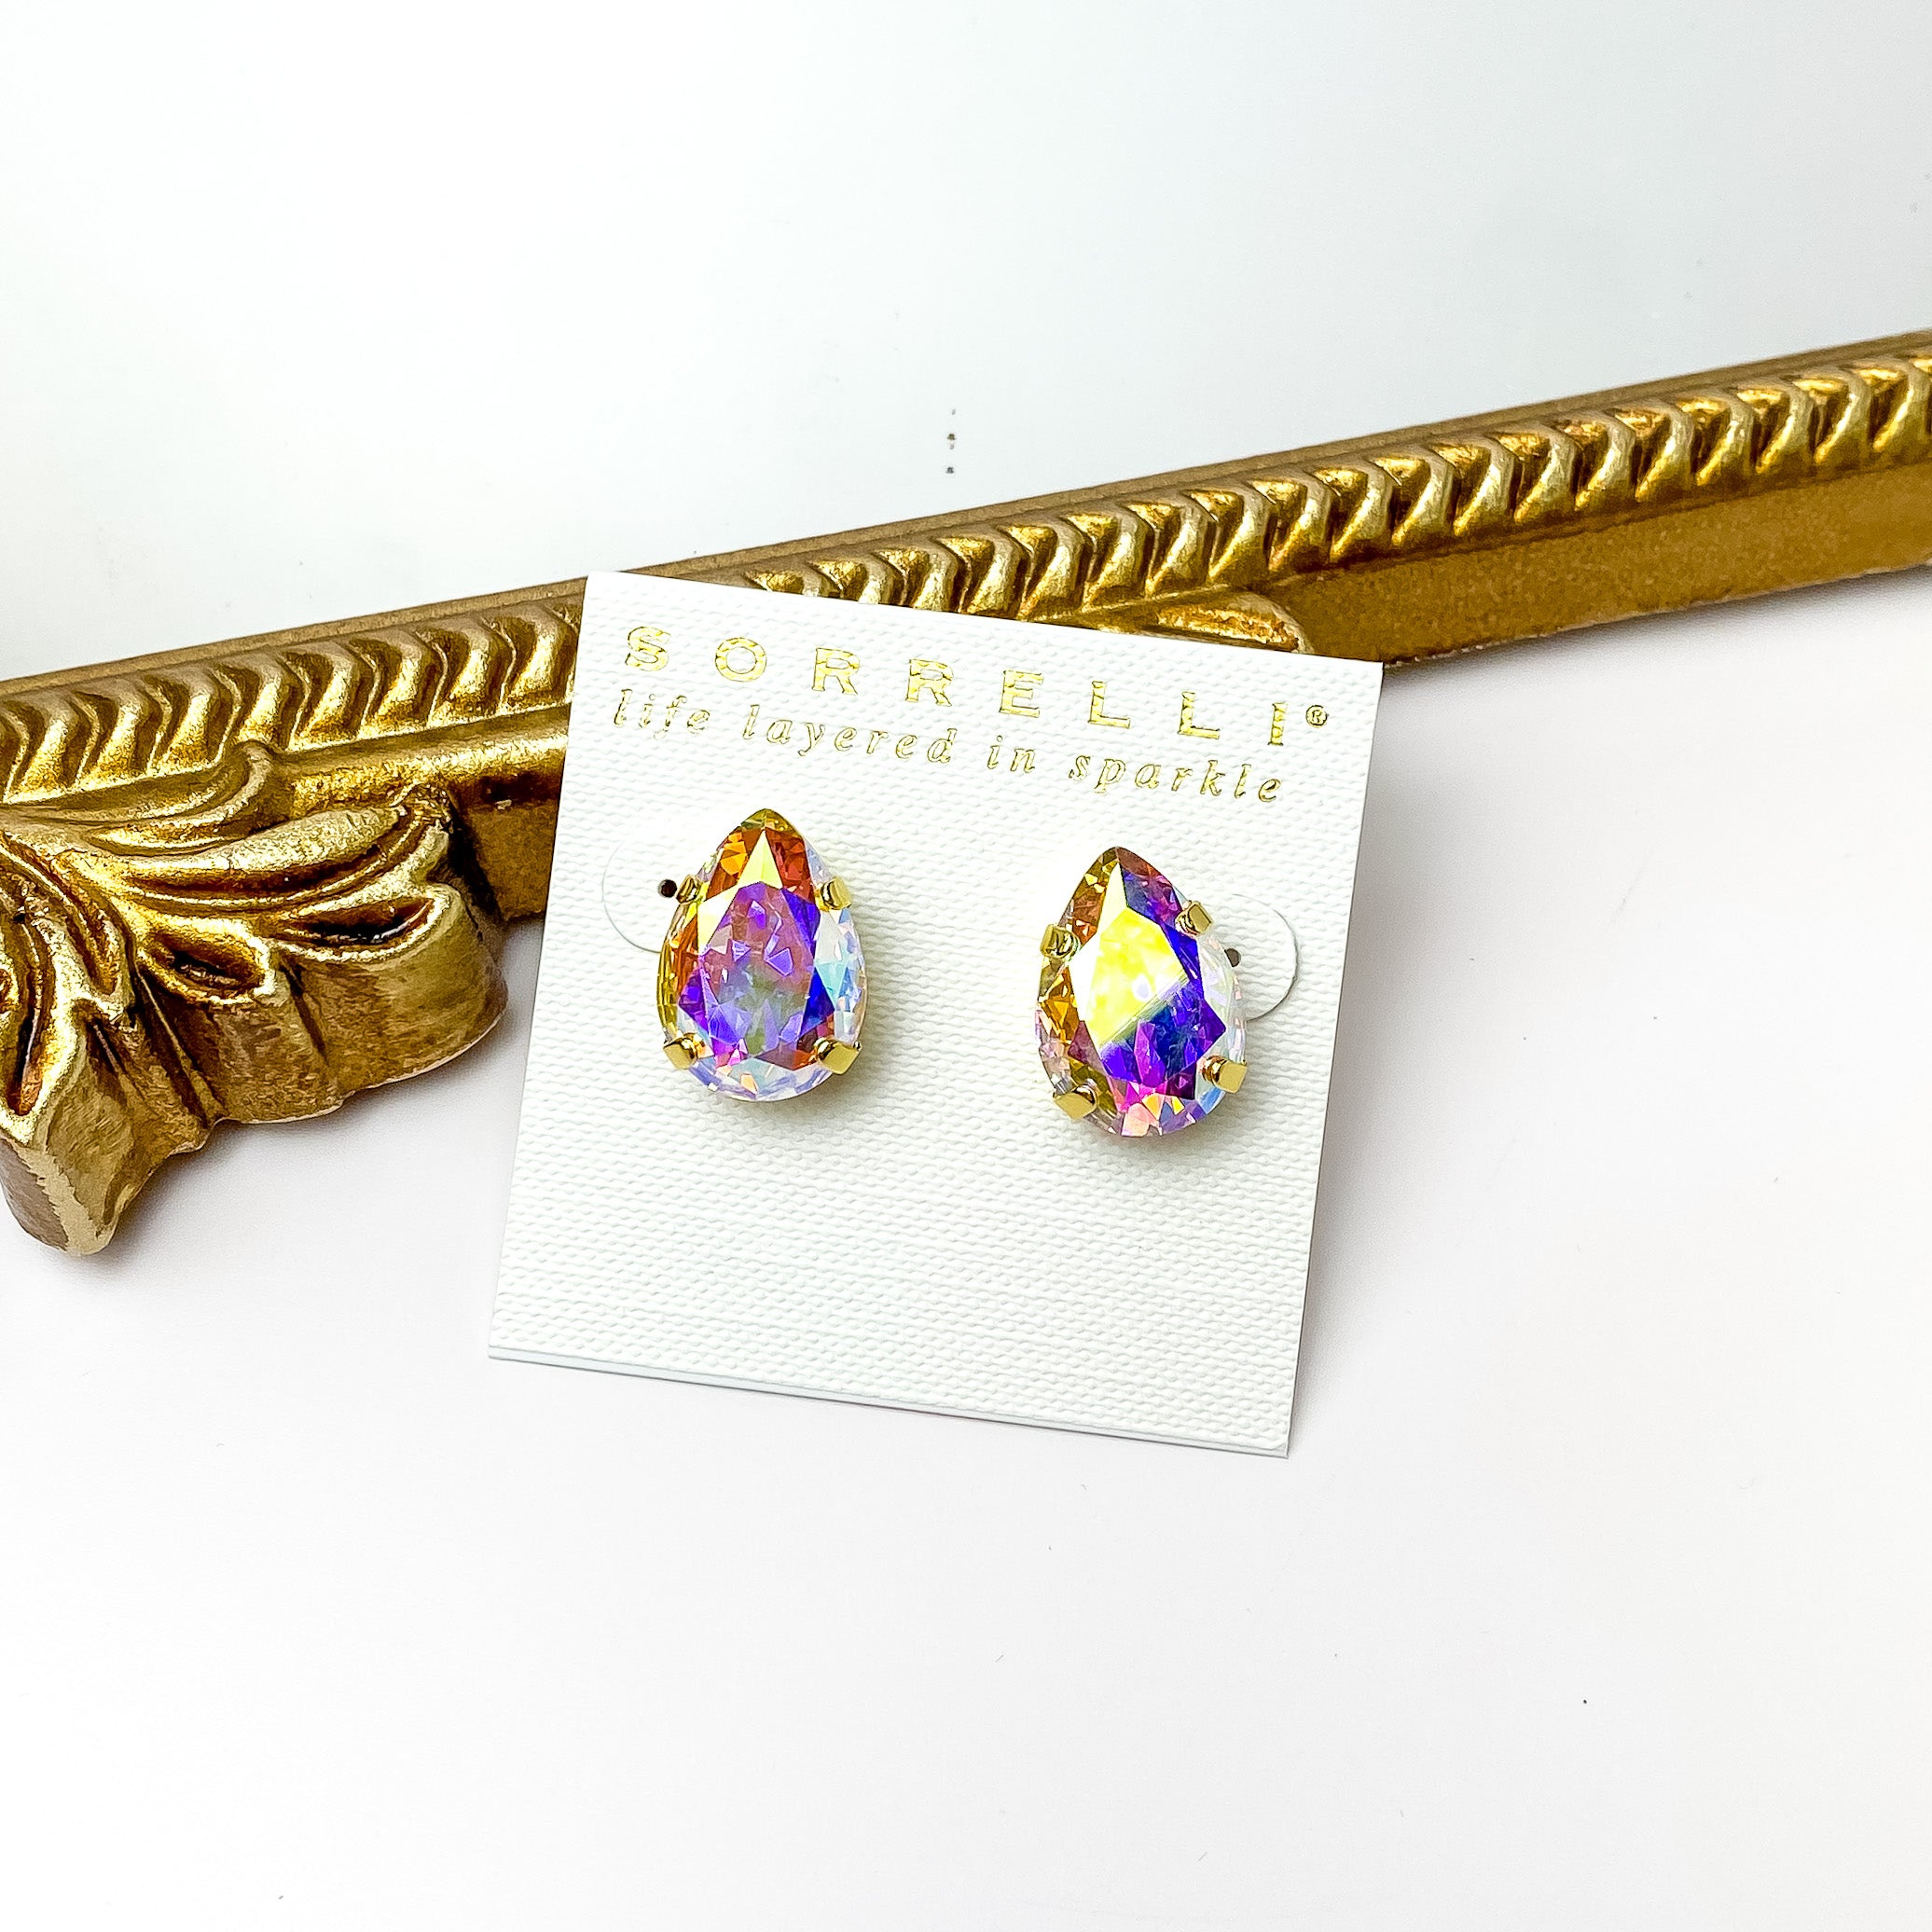 Single clear crystal stud earrings with a gold backing. Pictured on a white background with a gold figure through the middle